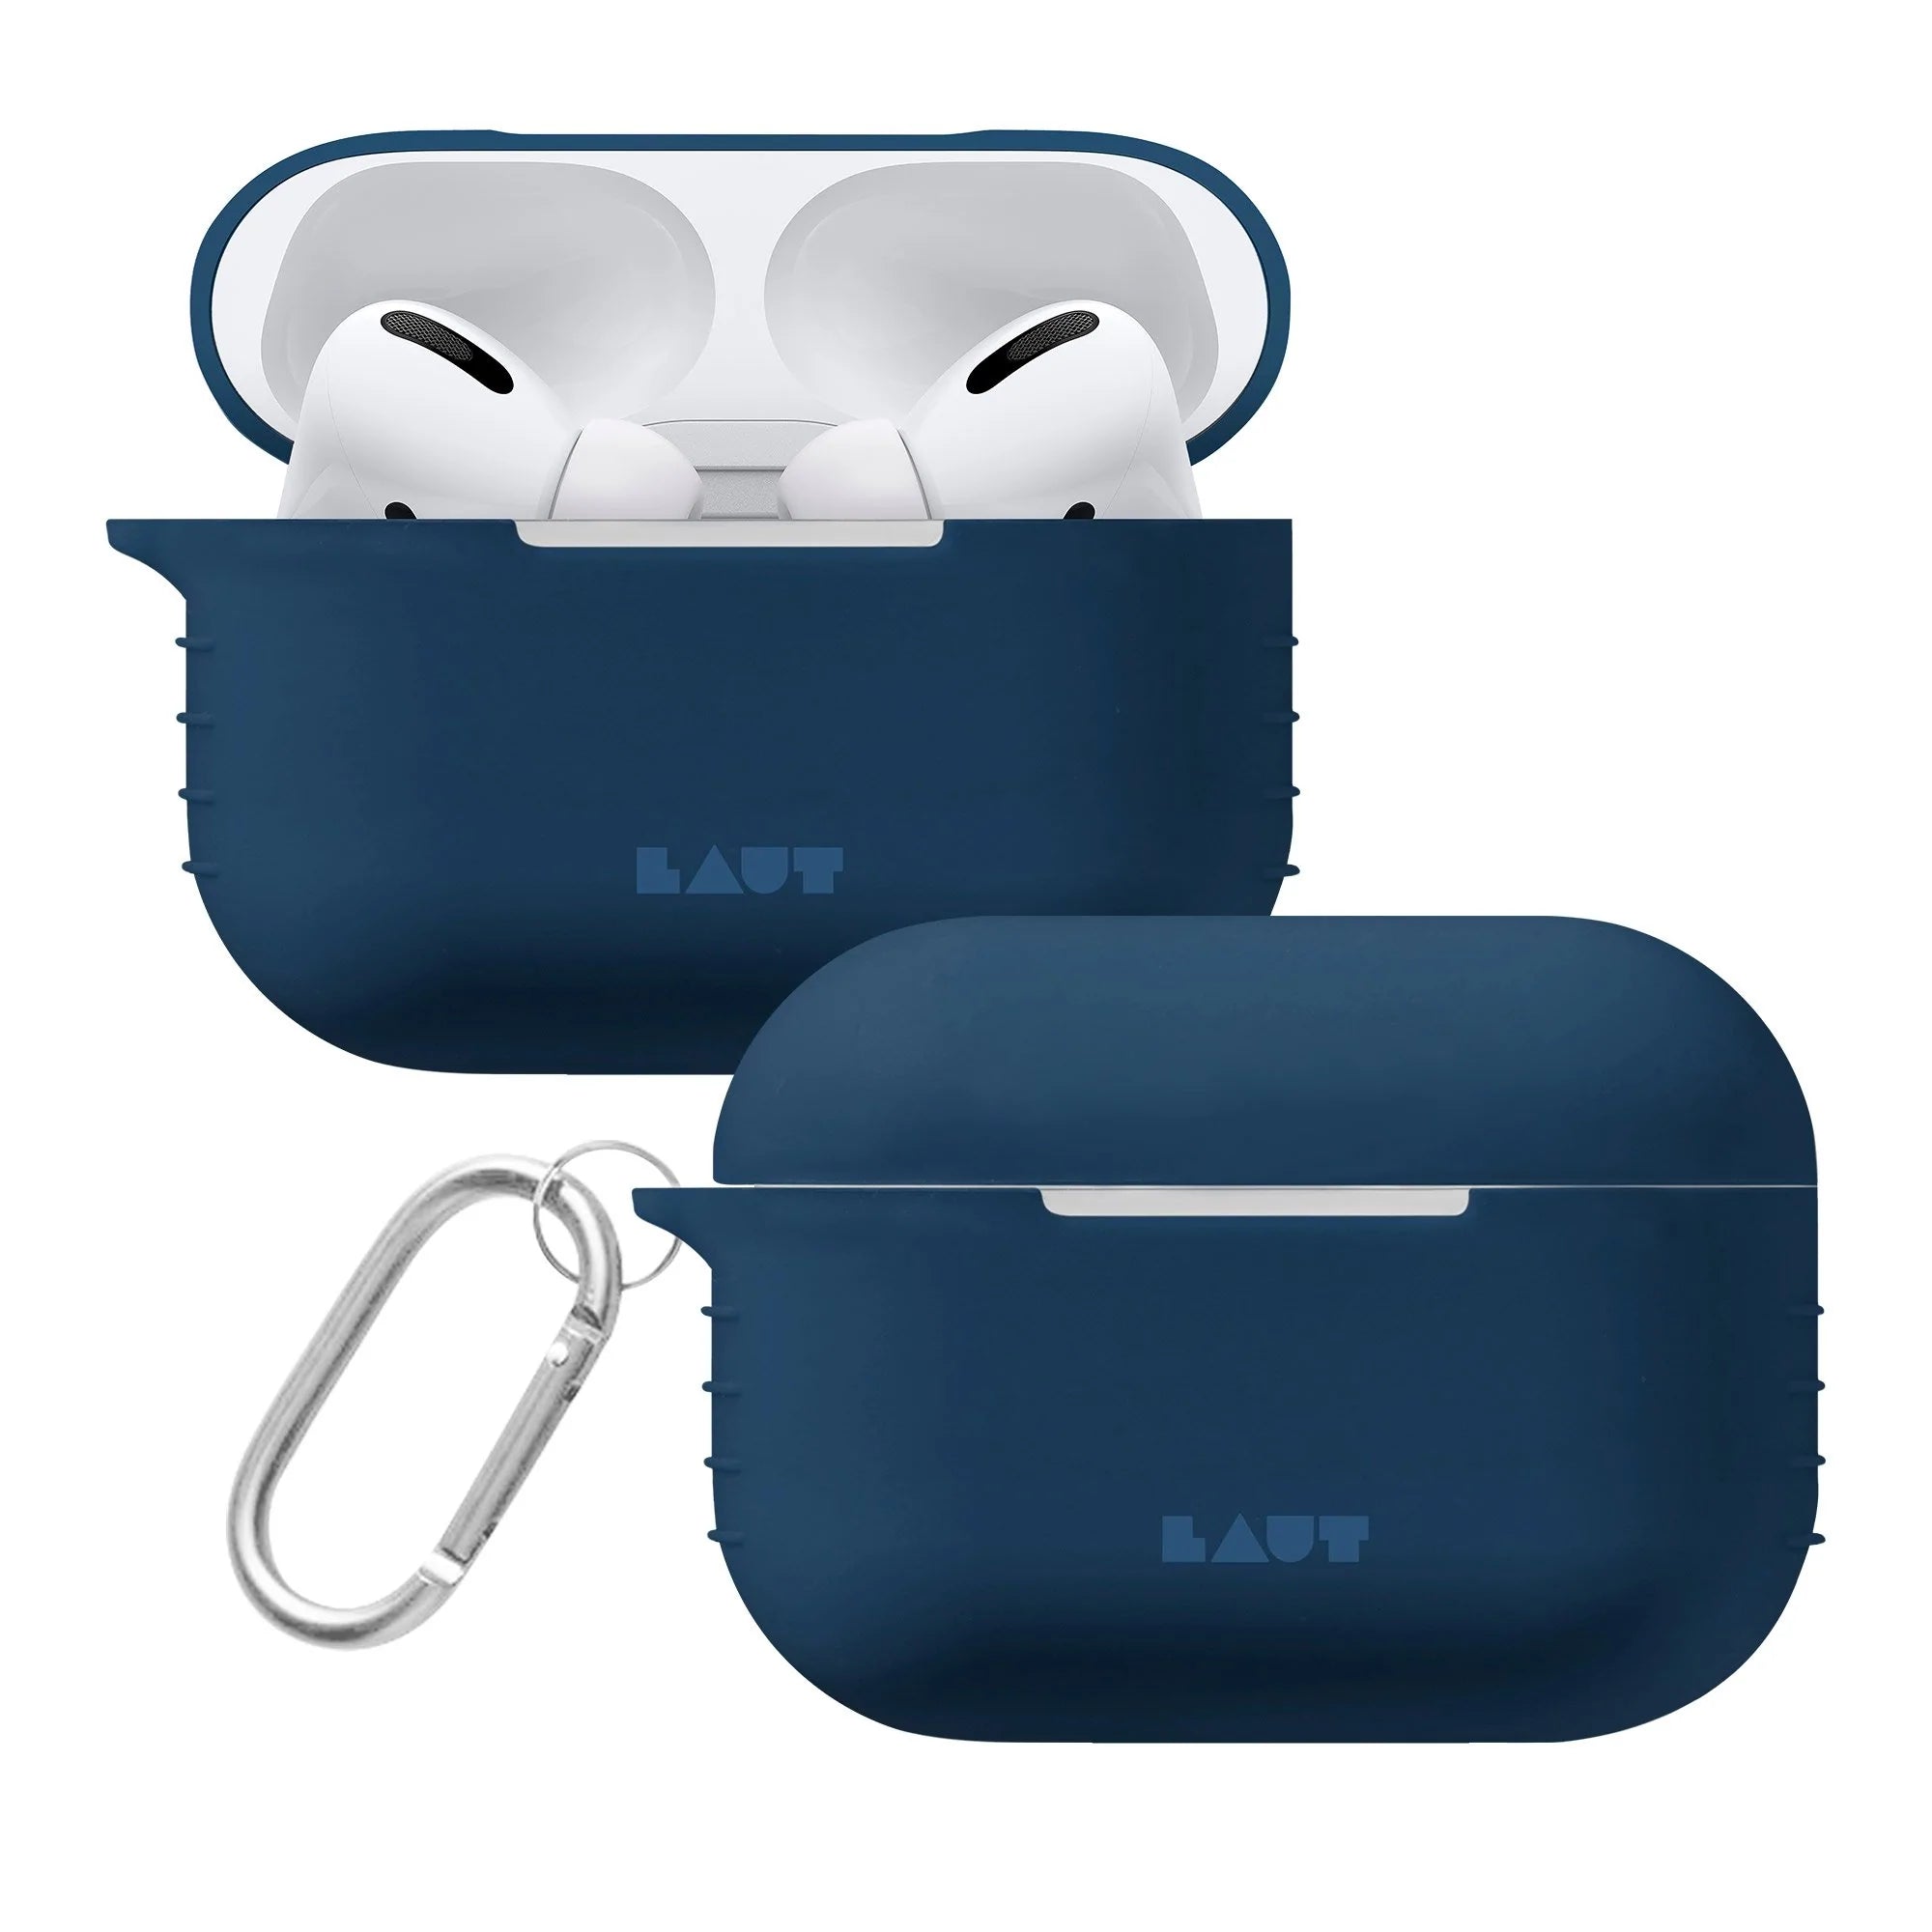 LAUT PODS for AirPods Pro